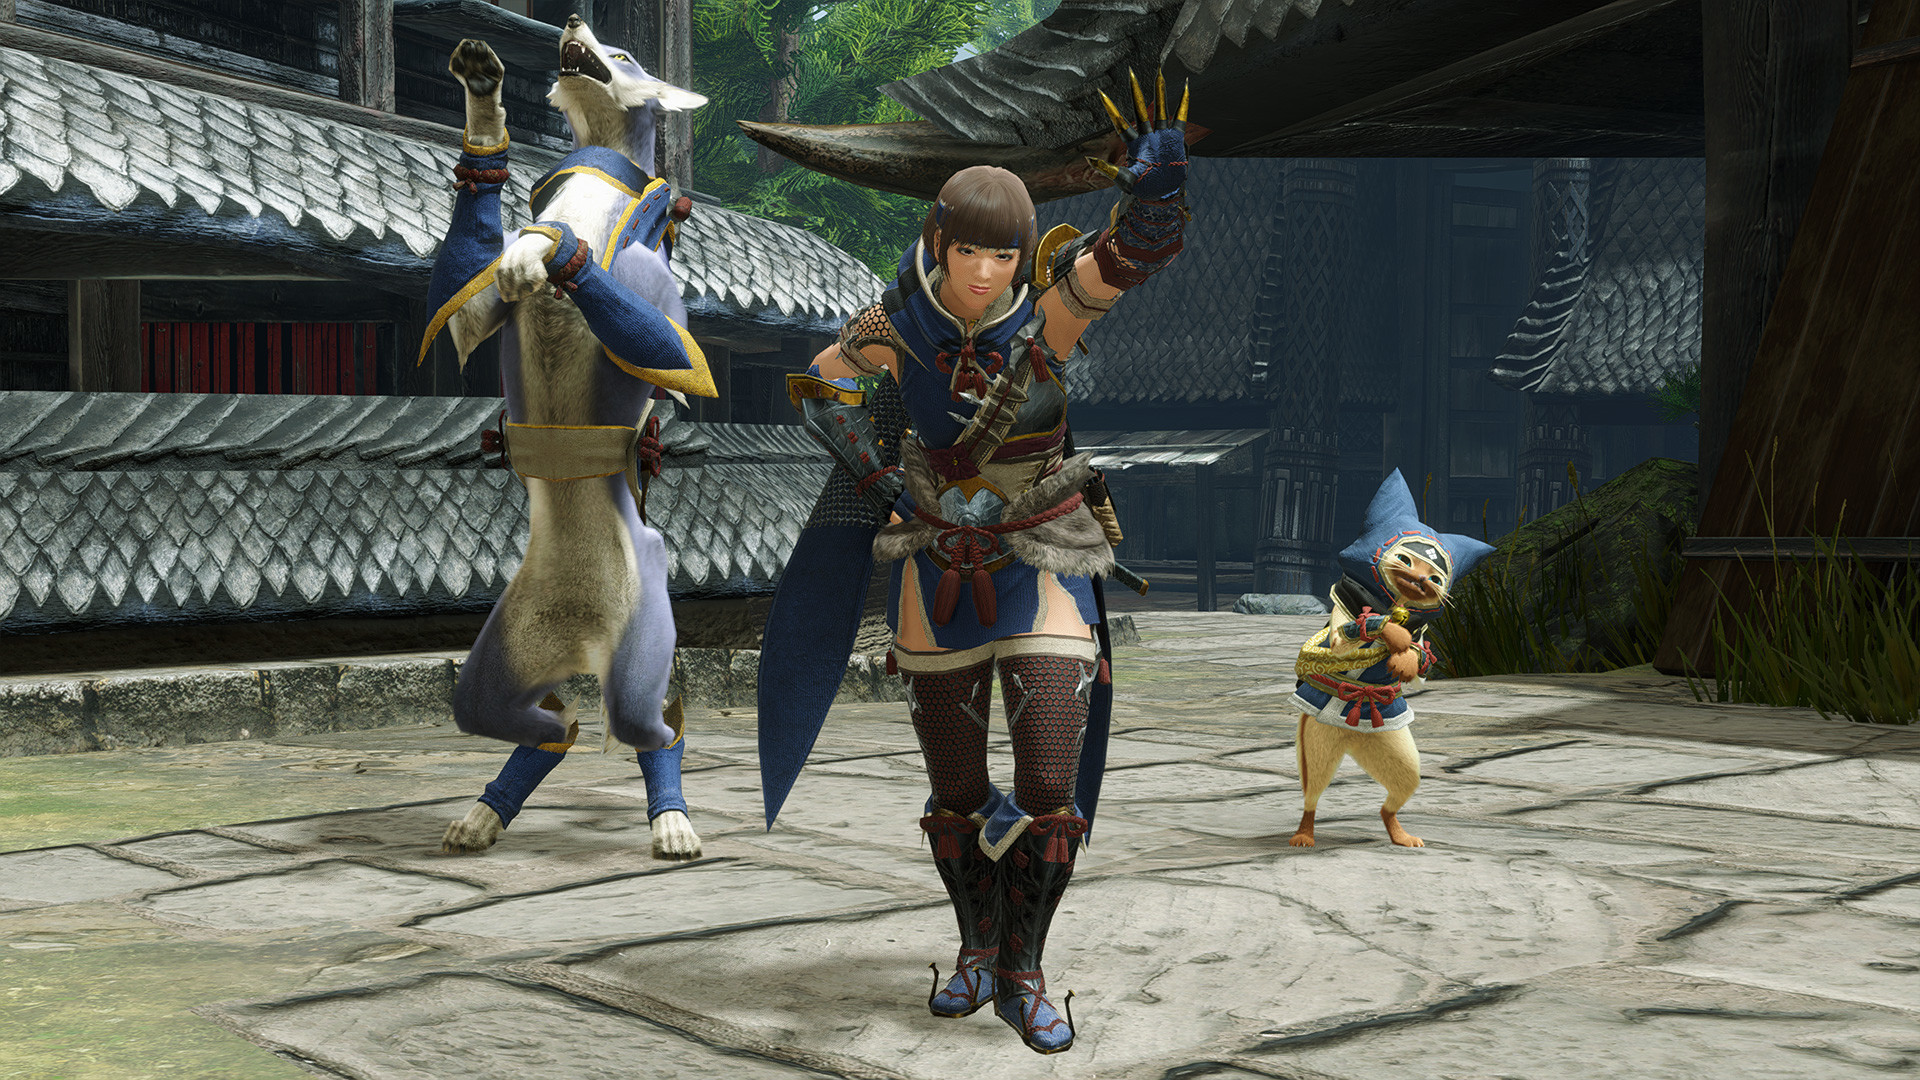 Save 60% on MONSTER HUNTER RISE on Steam